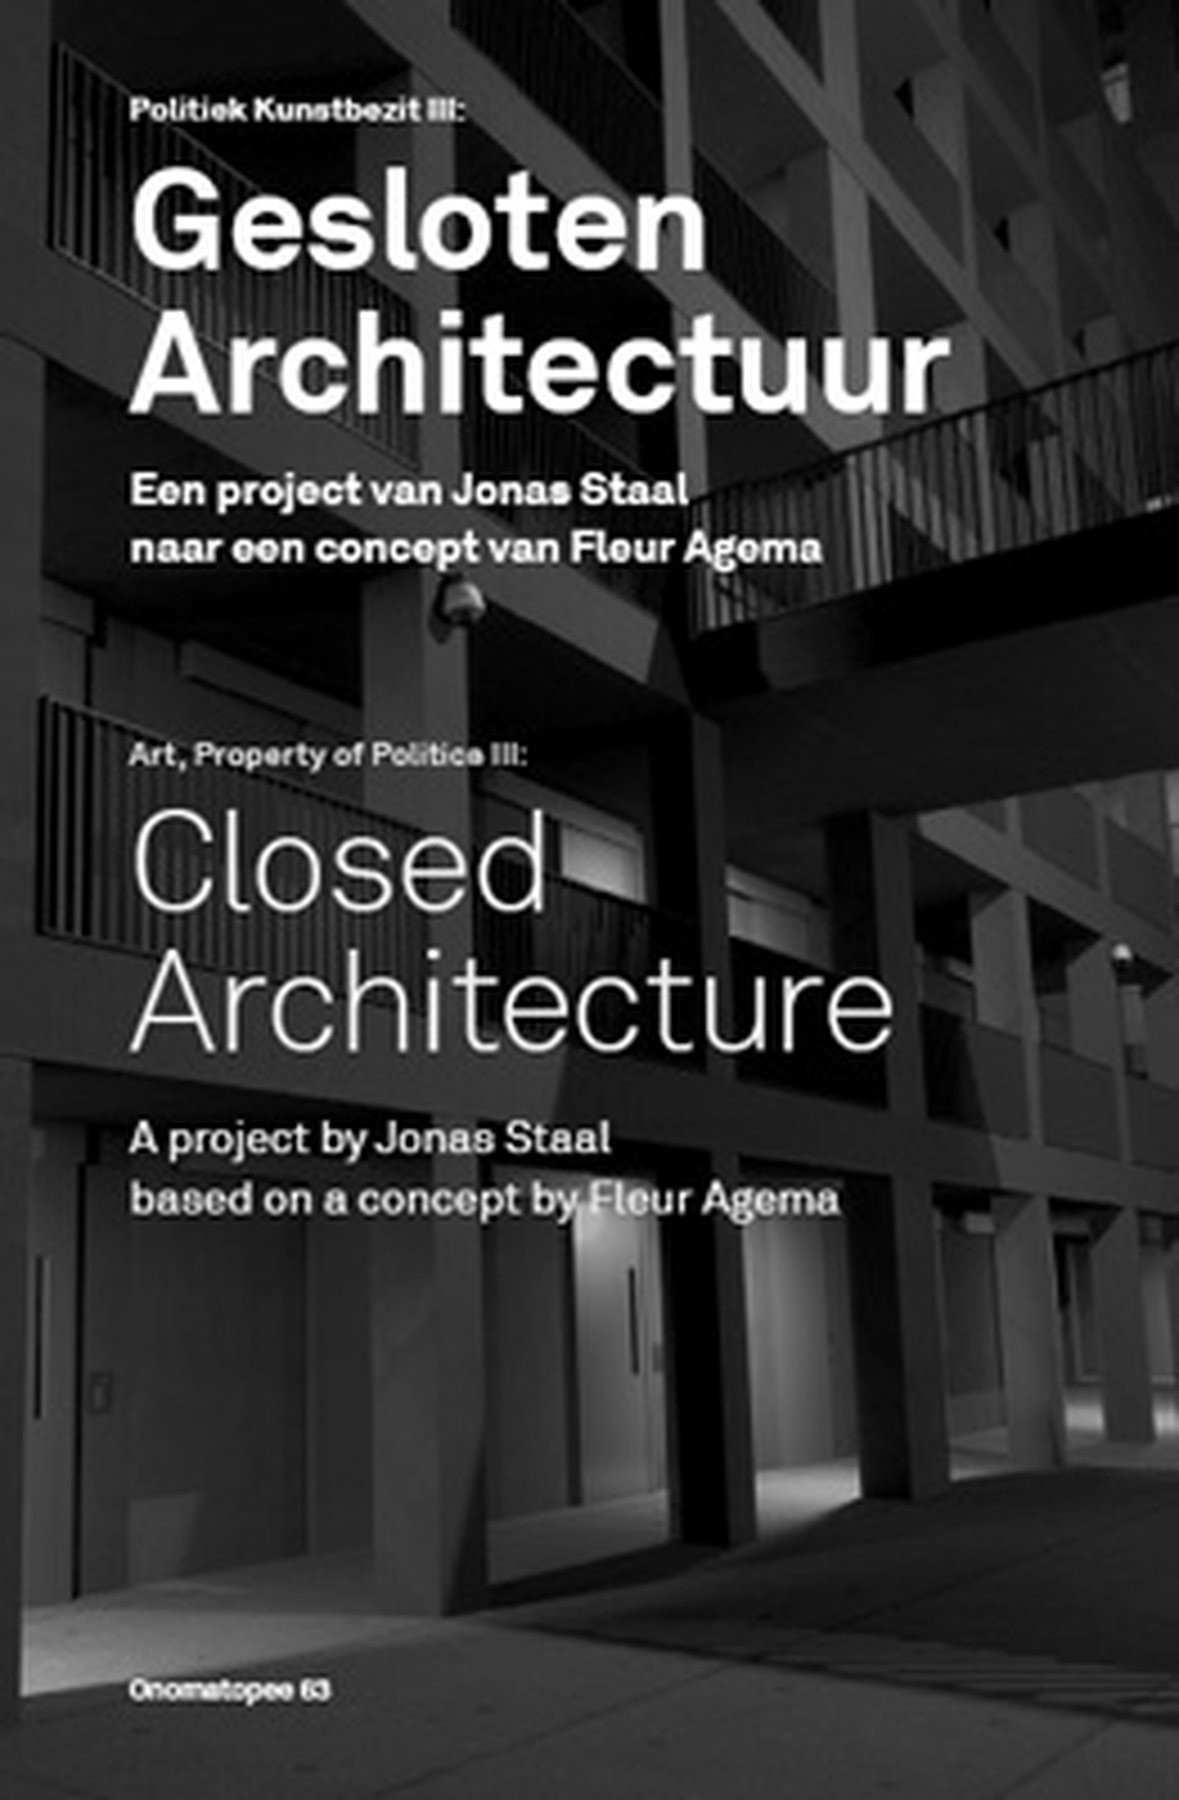 CLOSED ARCHITECTURE. Research on an prison model designed by Dutch ultranationalist Freedom Party MP Fleur Agema, translated to three-dimensional images by Jonas Staal. Texts by Fleur Agema and Jonas Staal, edited by Urok Shirhan and Vincent W.J. van Gerv